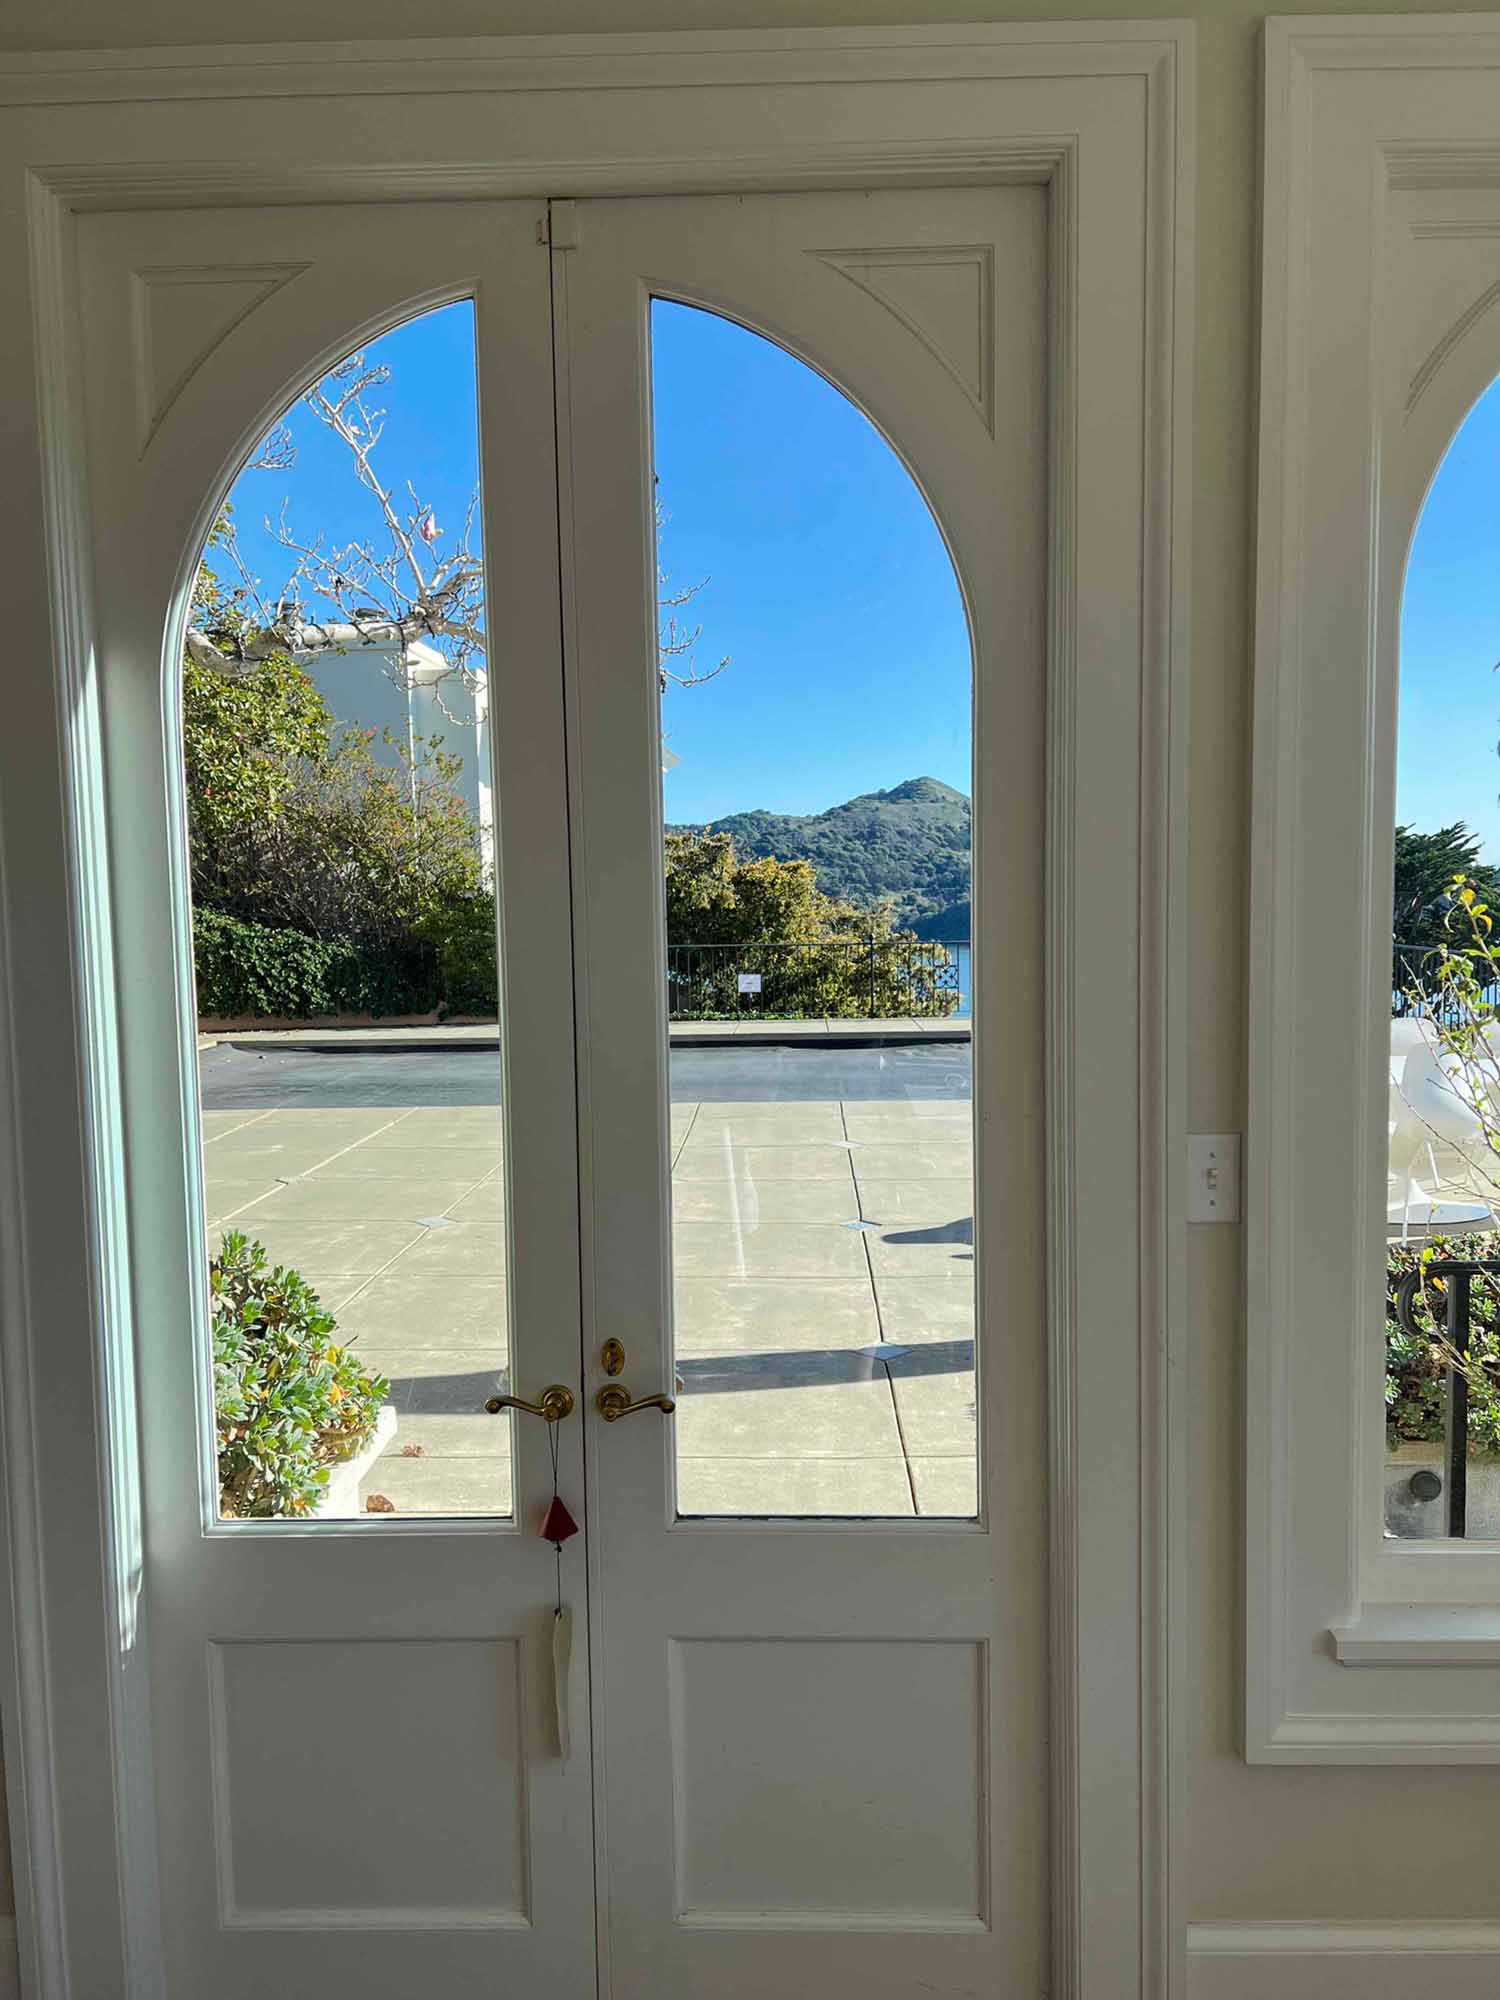 How can you get Sun Control Window Film for Your Belvedere, CA Home? Call ClimatePro for a free estimate today.